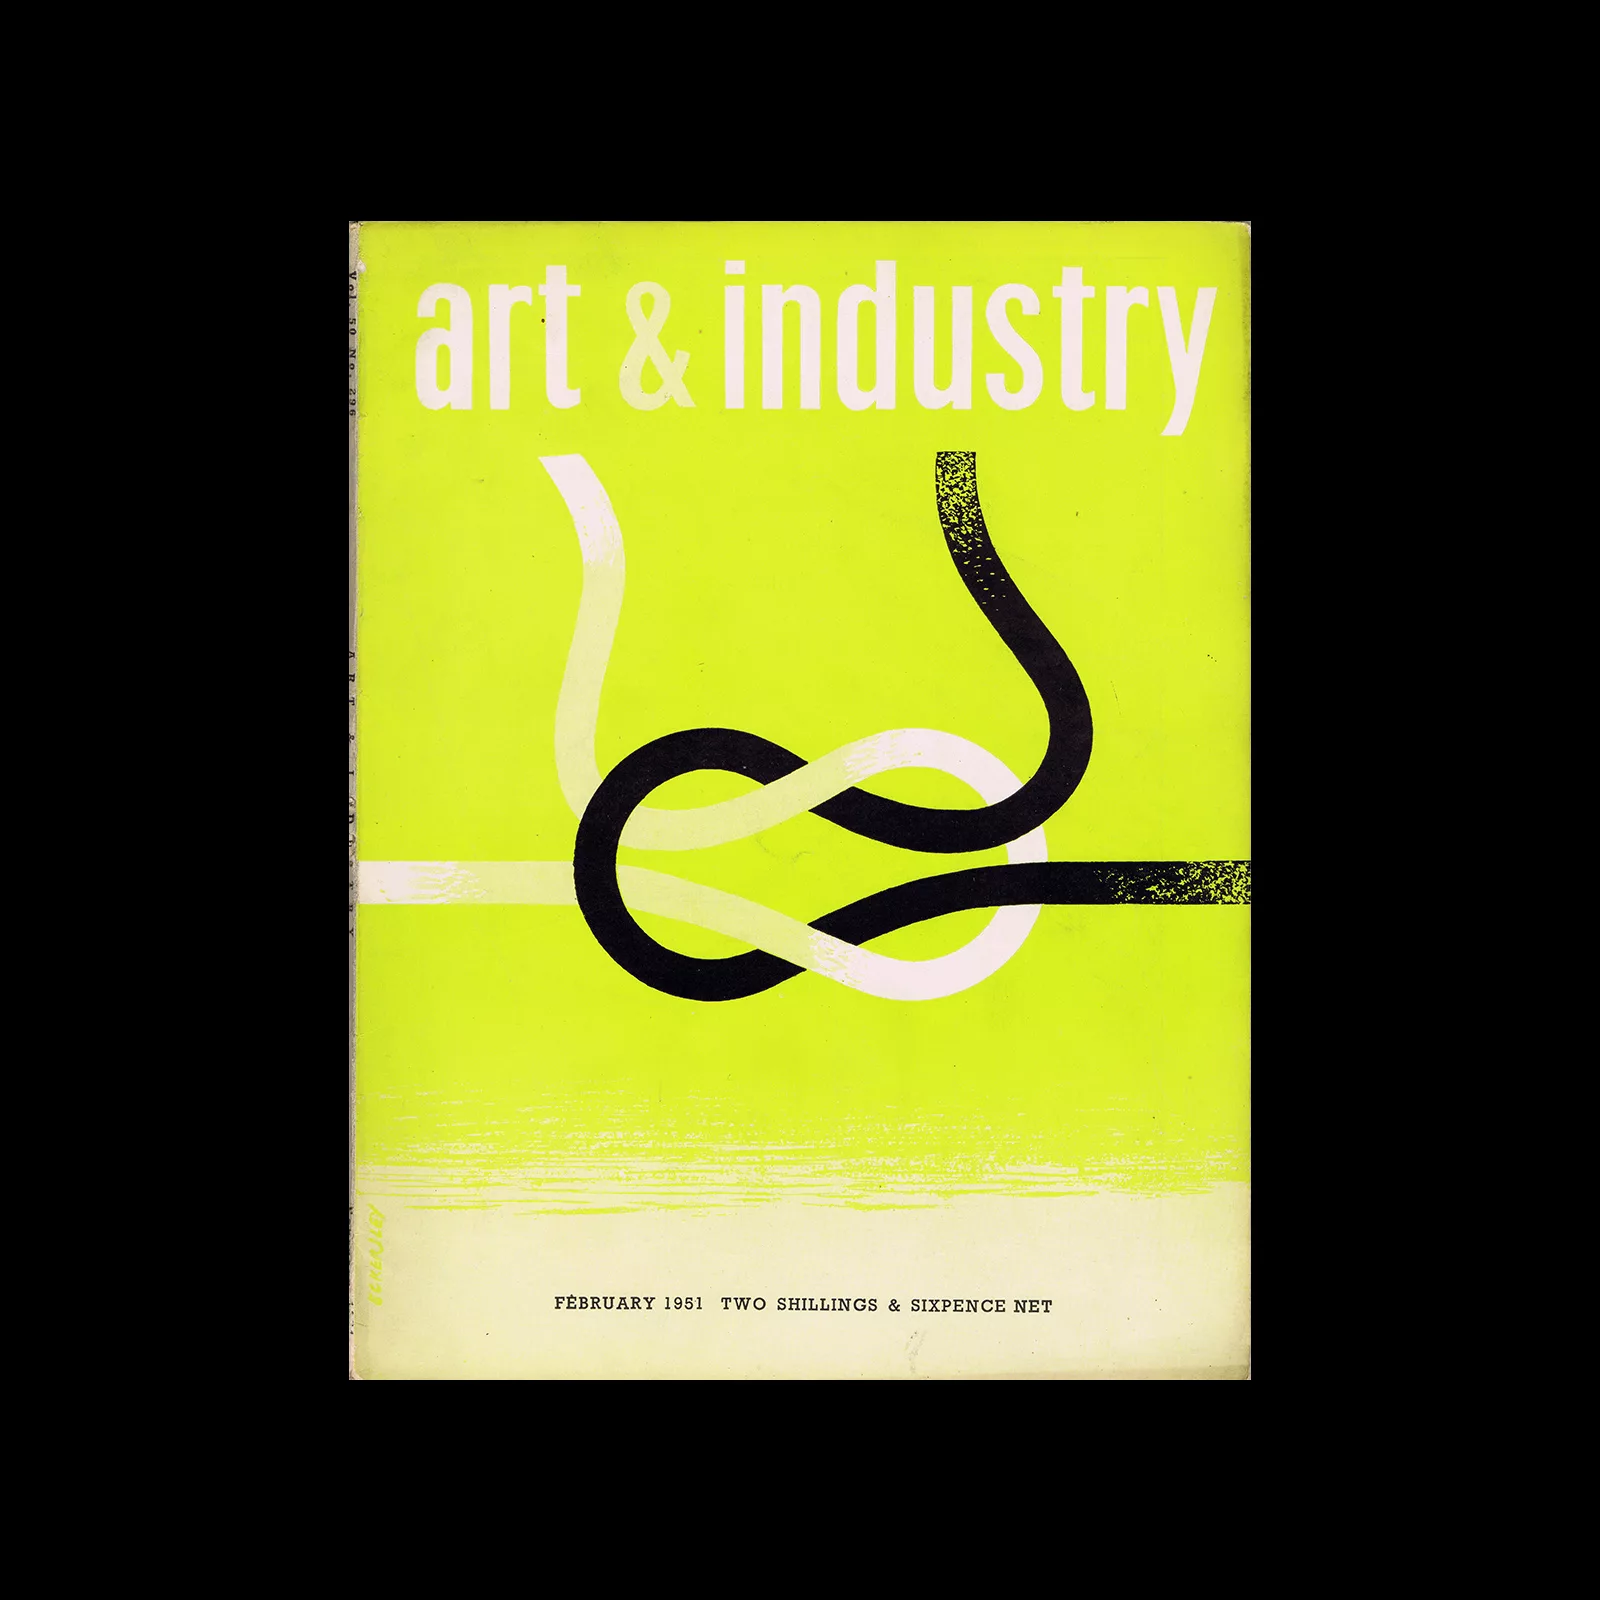 Art & Industry 296, February 1951. Cover design by Tom Eckersley